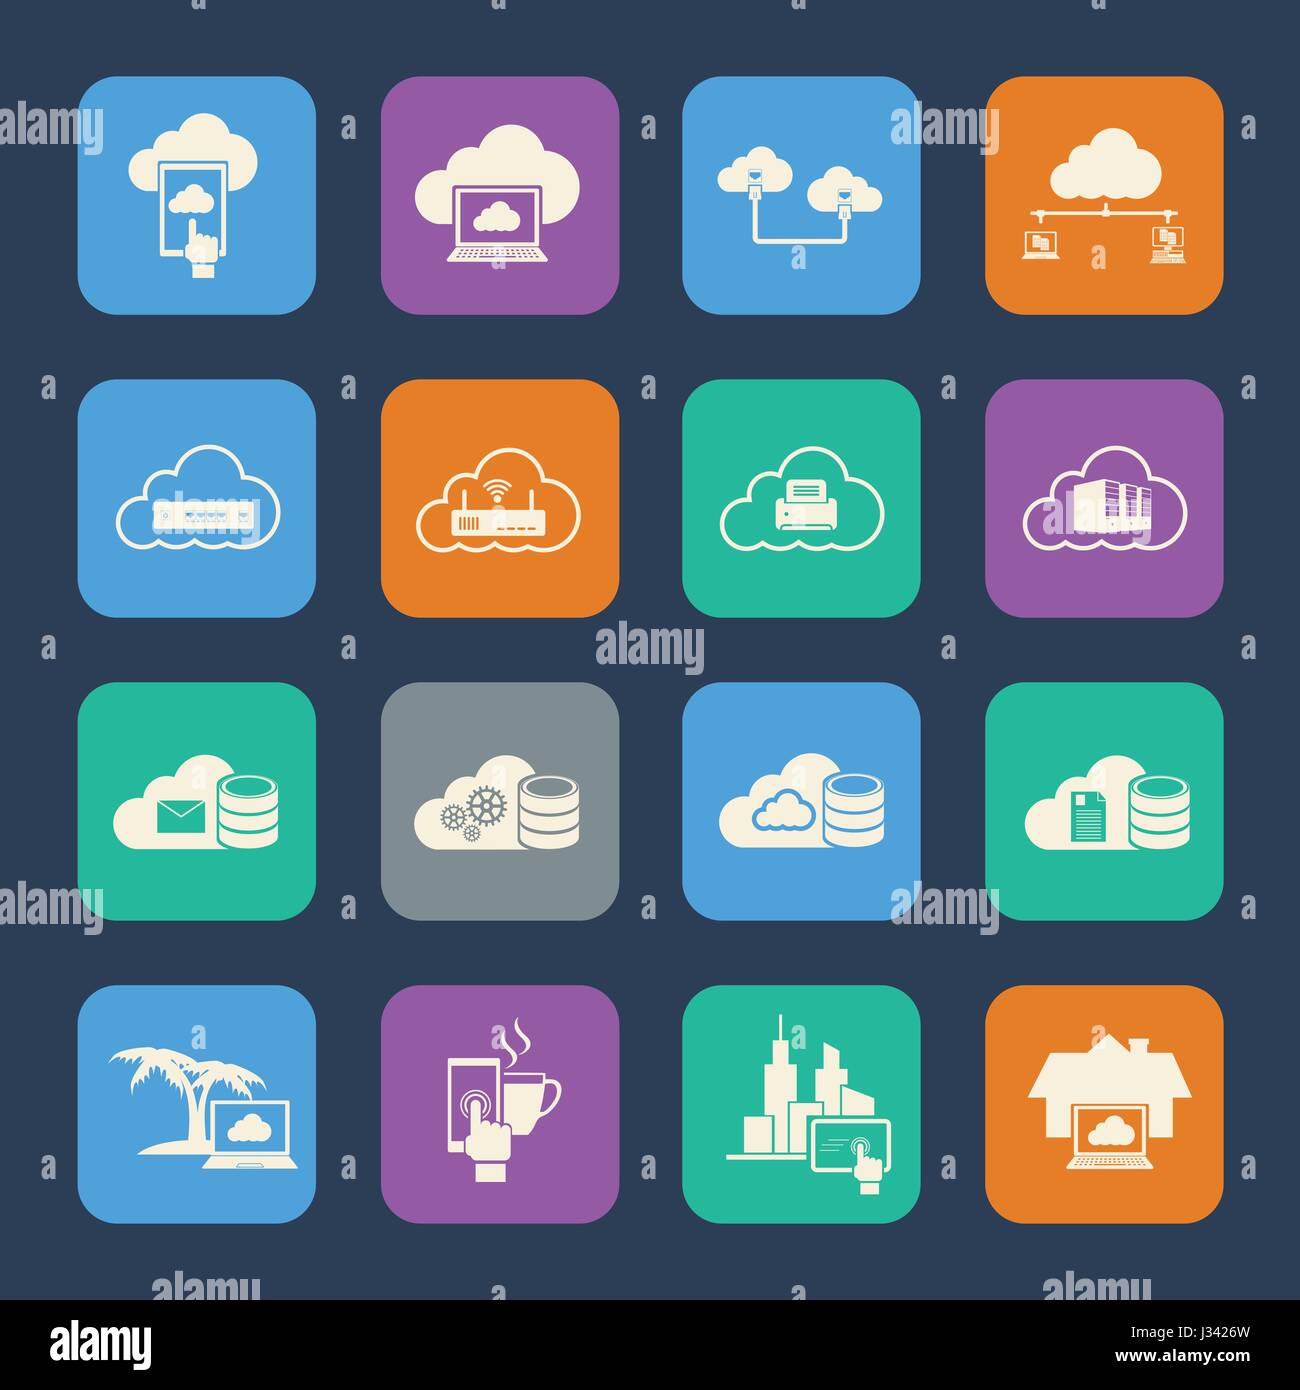 Cloud computing icons set. Flat design for Website and Mobile applications. Vector Stock Vector